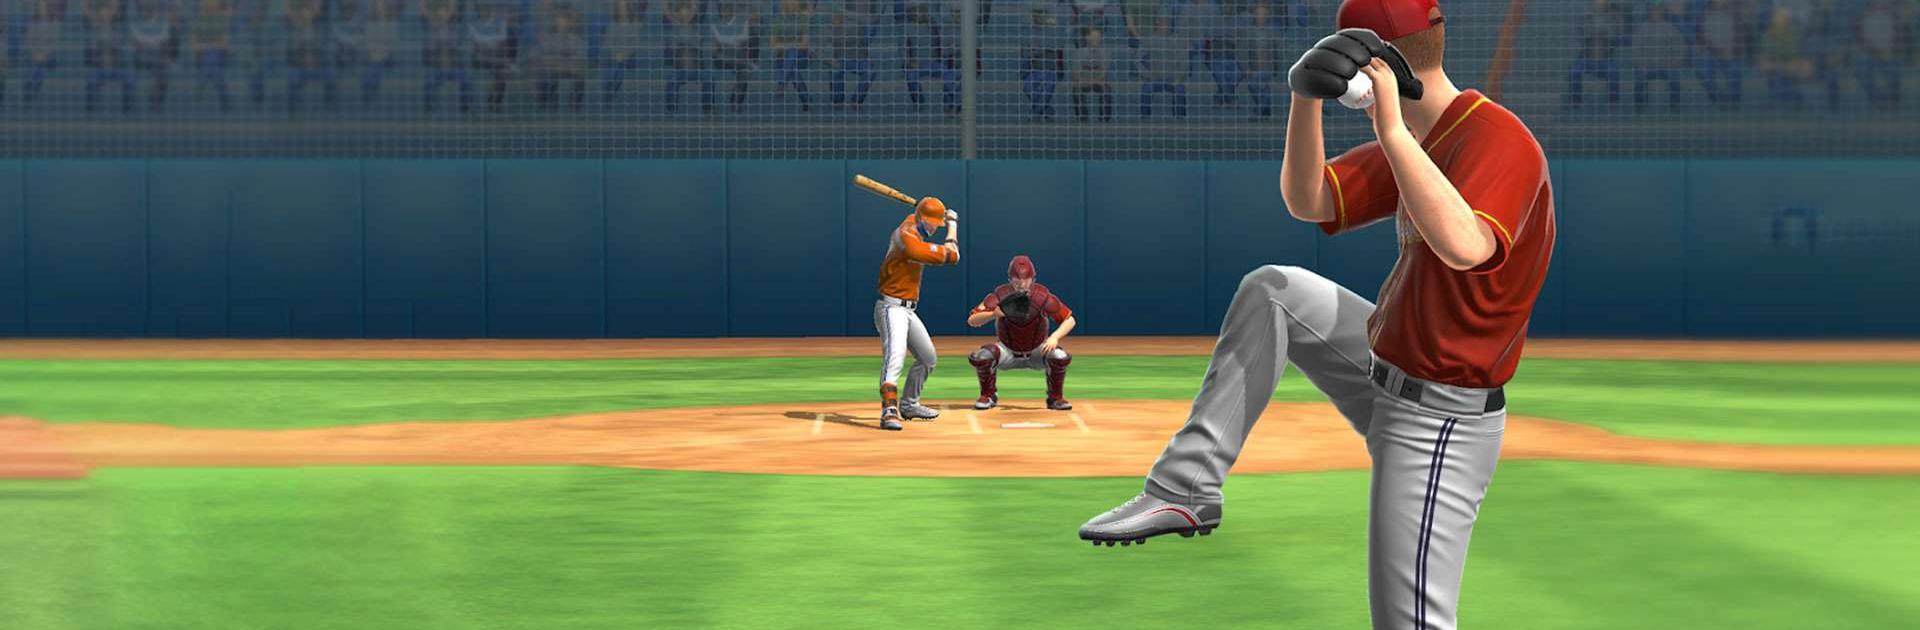 Play Baseball Home Run Sports Game Online for Free on PC and Mobile now.gg